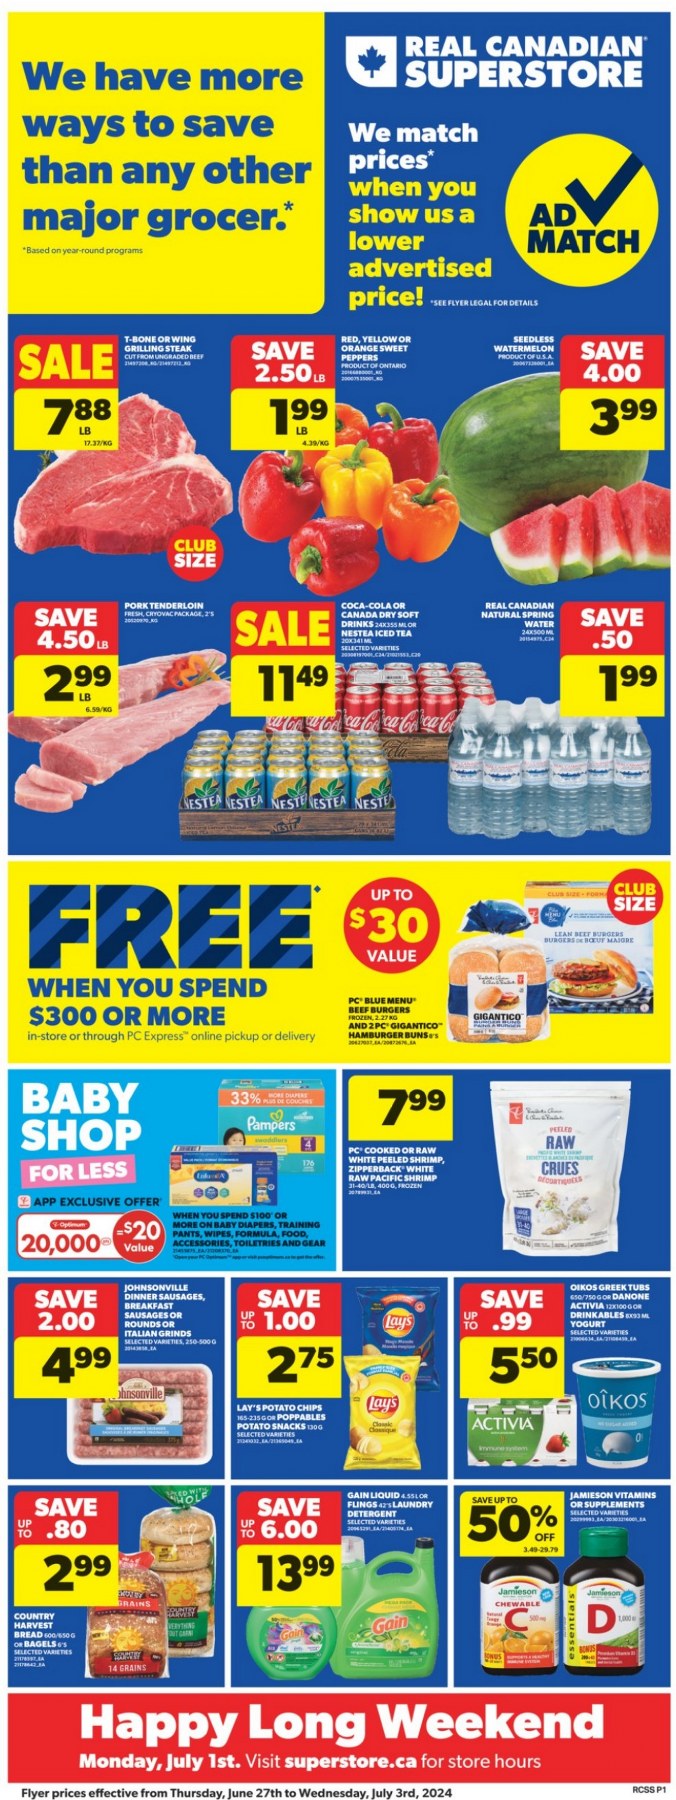 real canadian superstore on flyer june 27 july 3 1